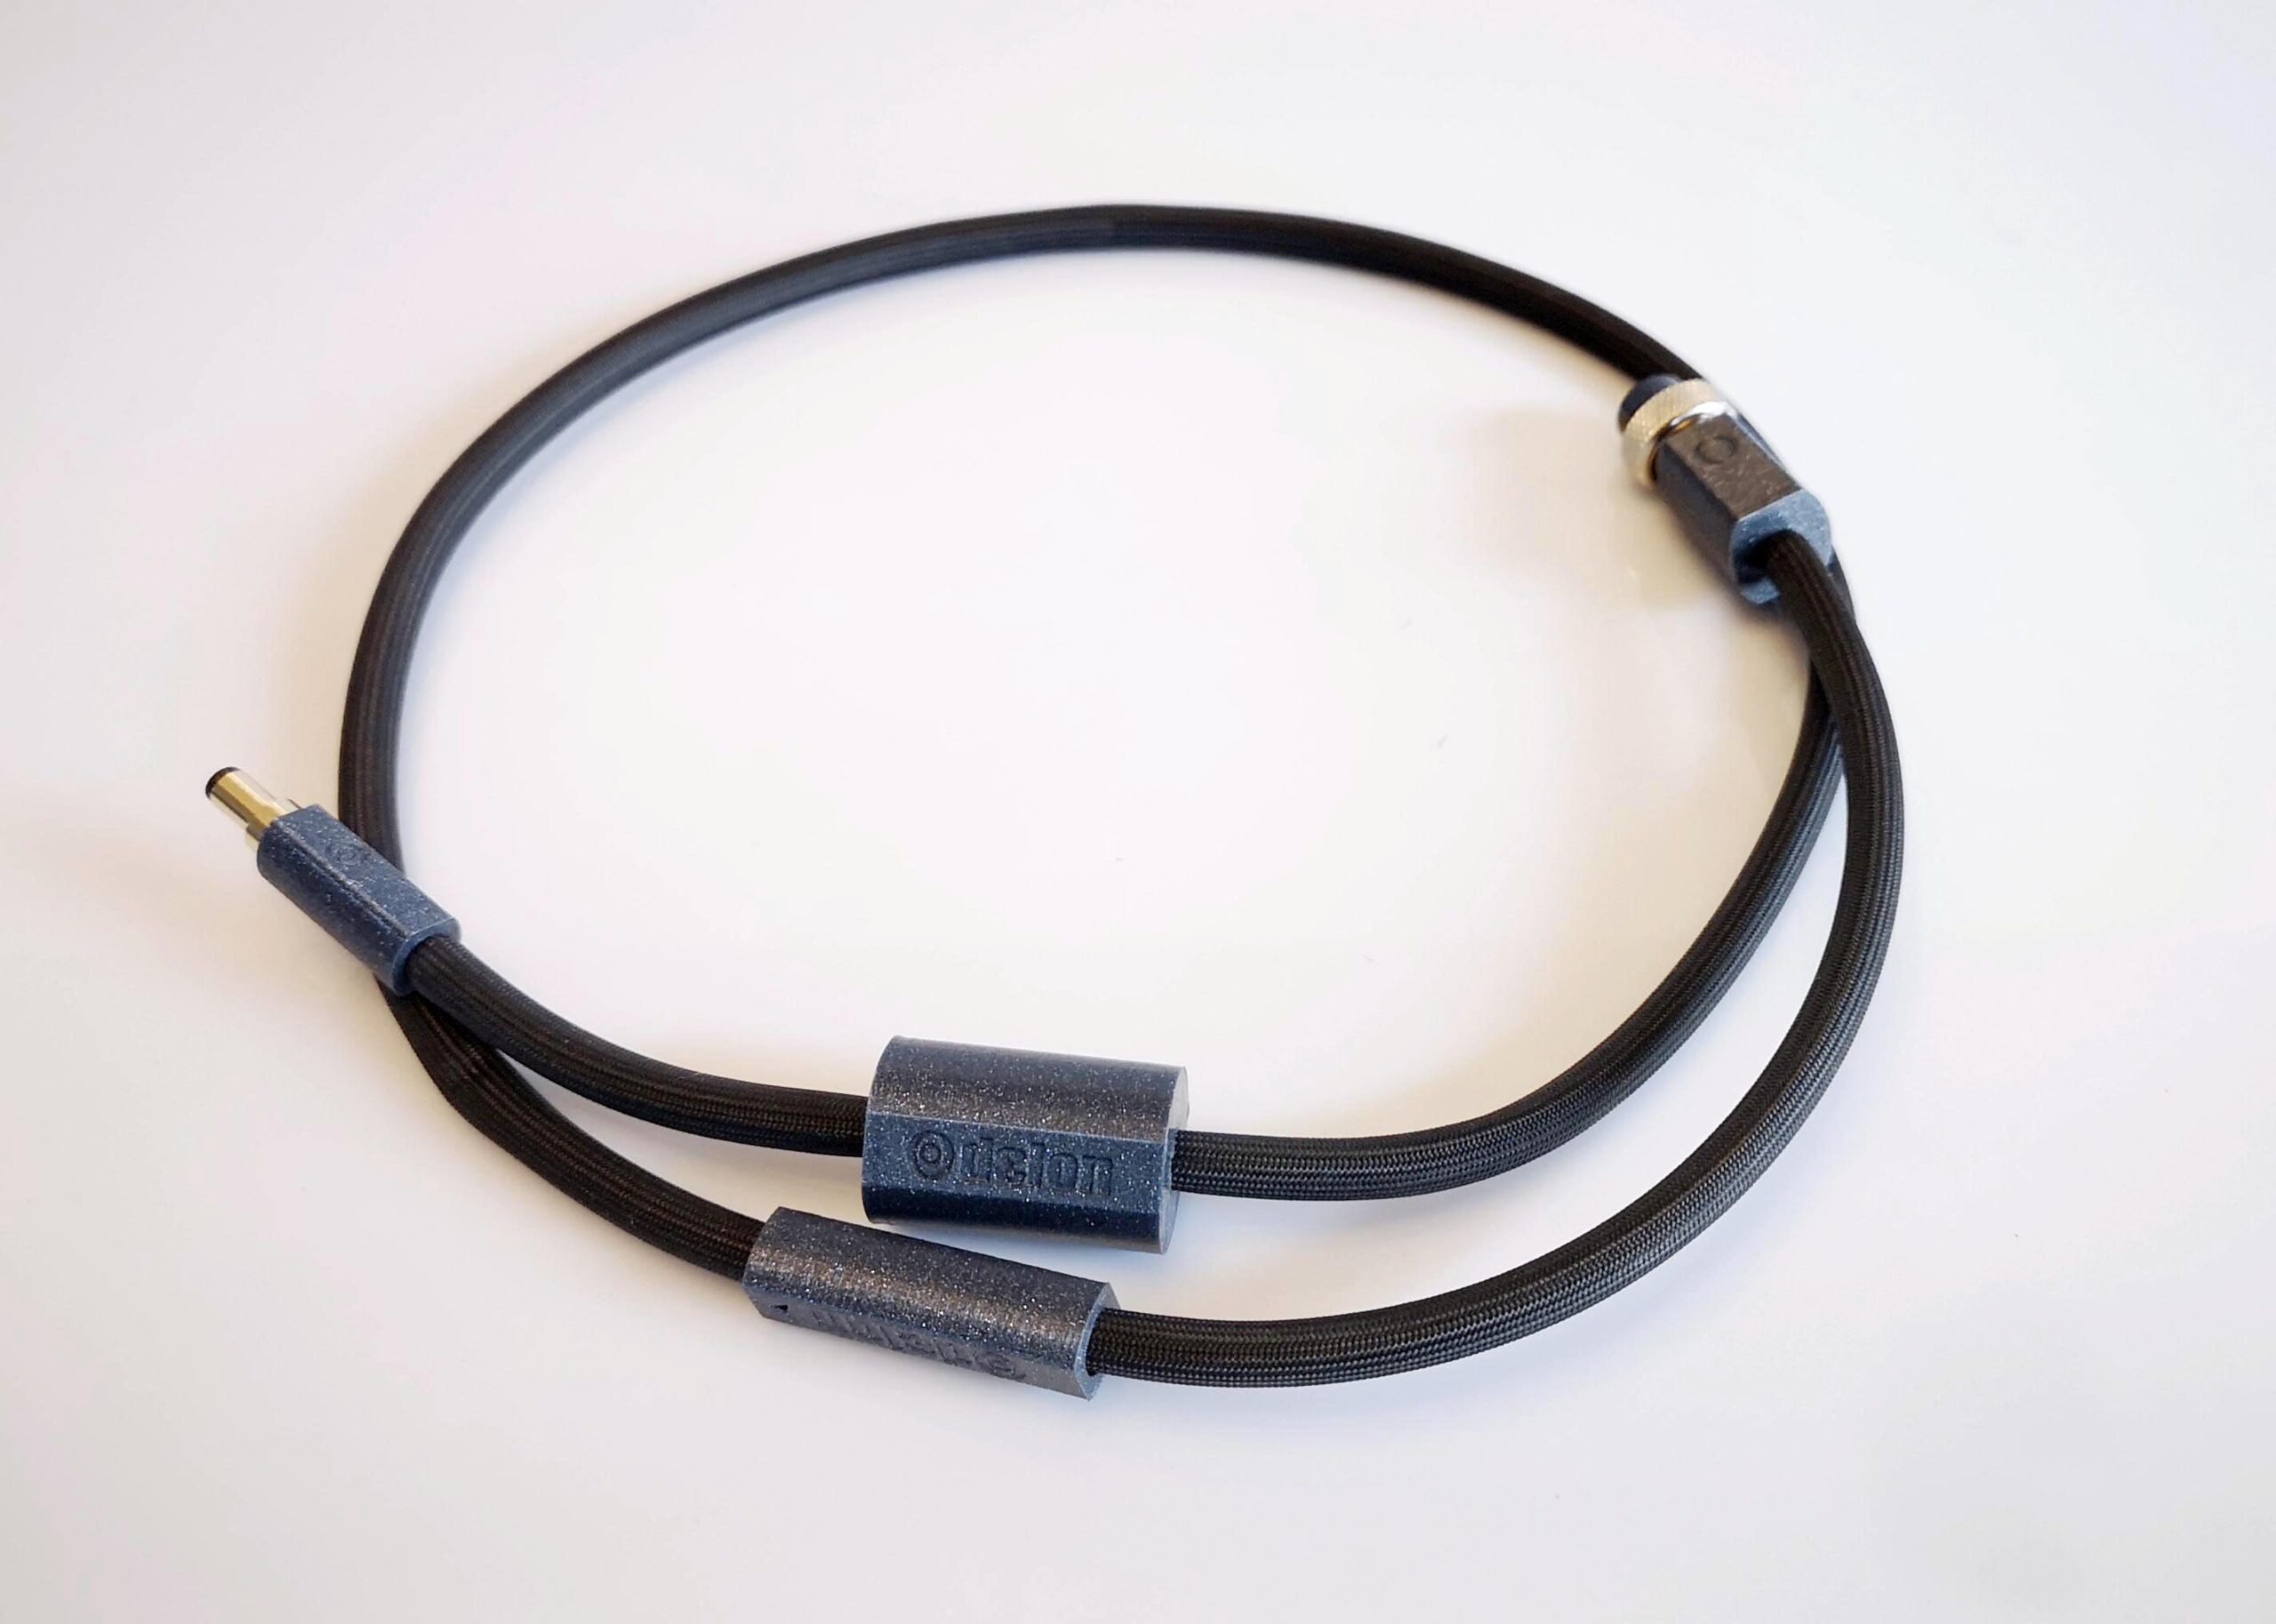 Omicron psu alimentation Odeion Cables